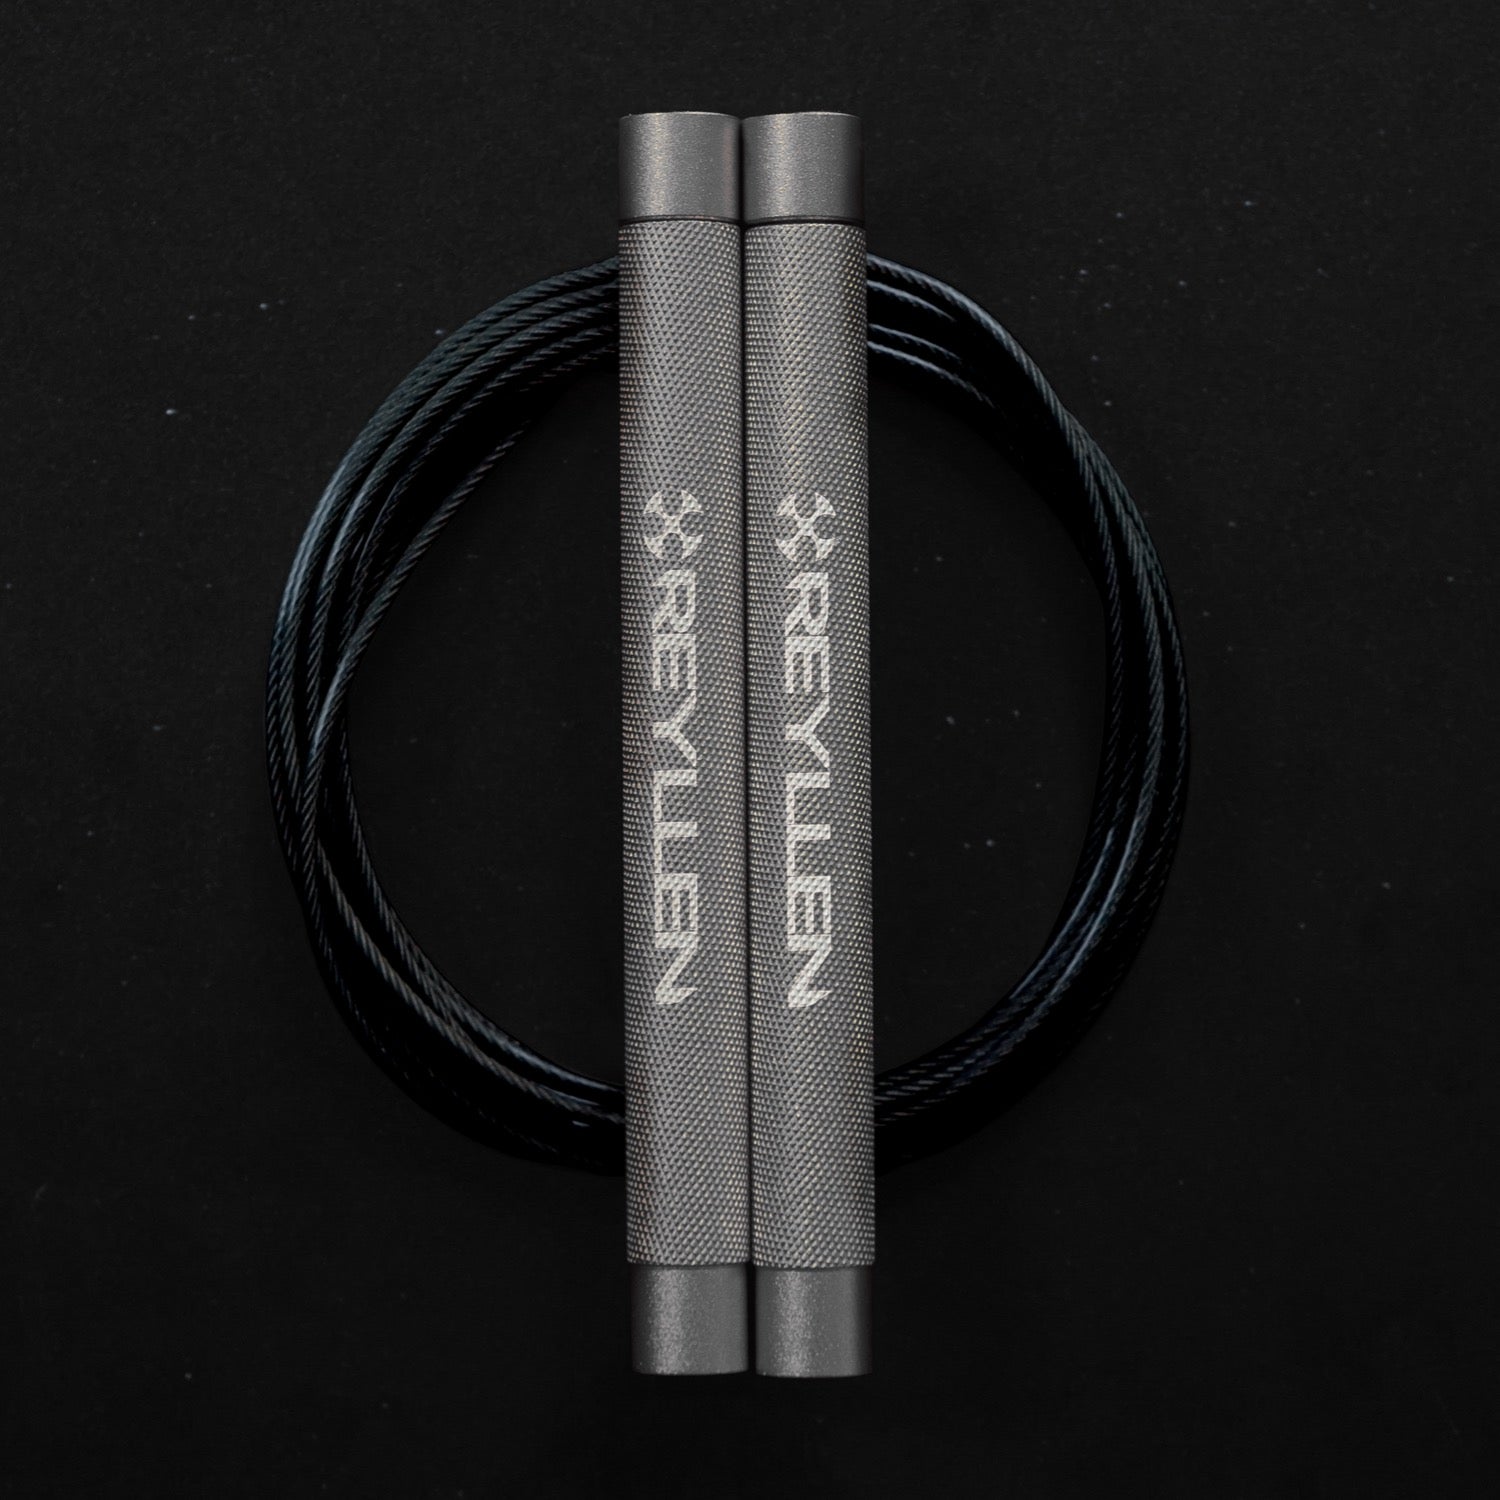 Reyllen Flare Mx Speed Skipping Jump Rope - Aluminium Handles - silver with black pvc coated cable